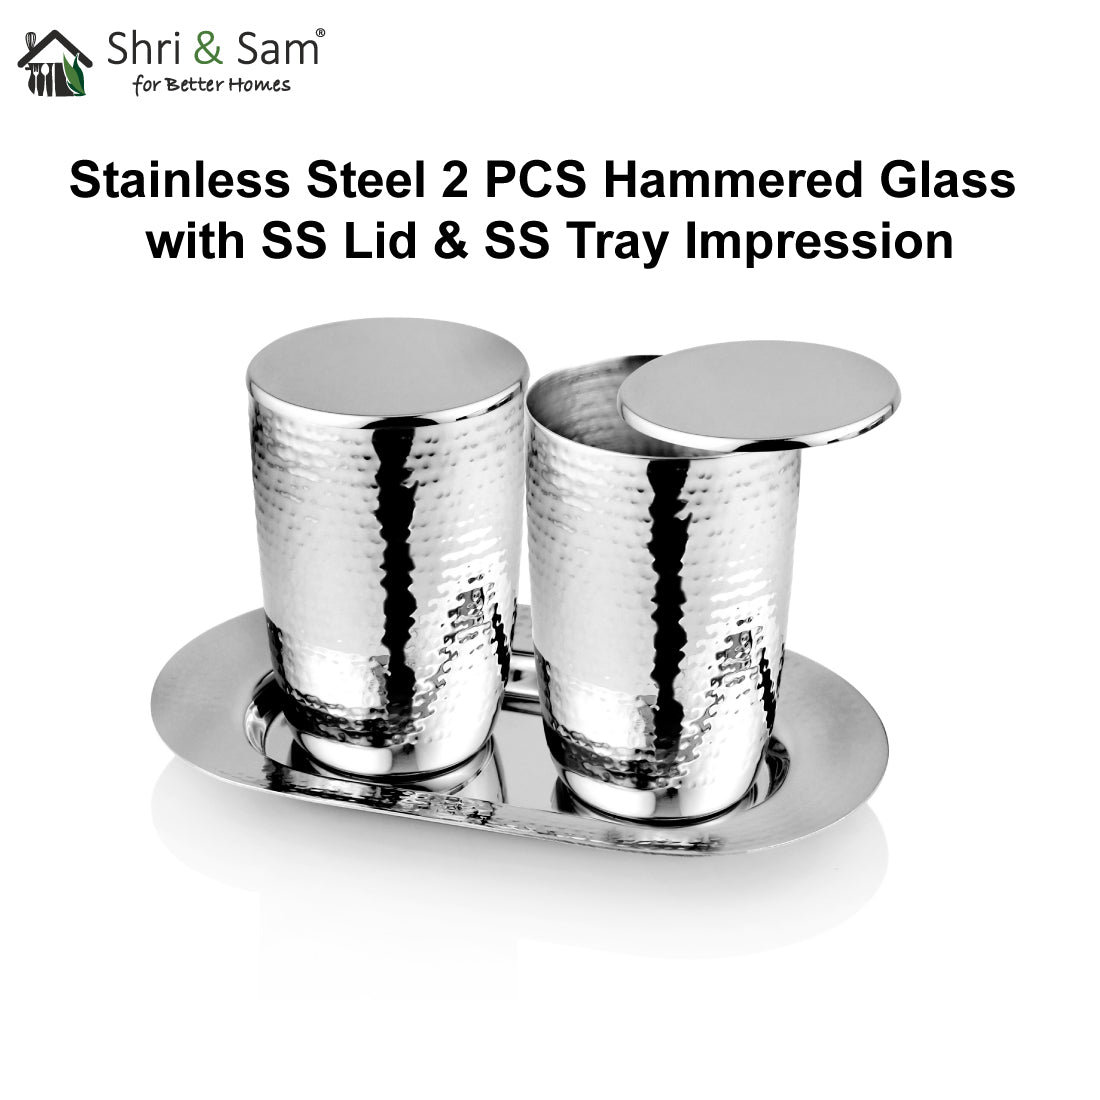 Stainless Steel 2 PCS Hammered Glass with SS Lid & SS Tray Impression